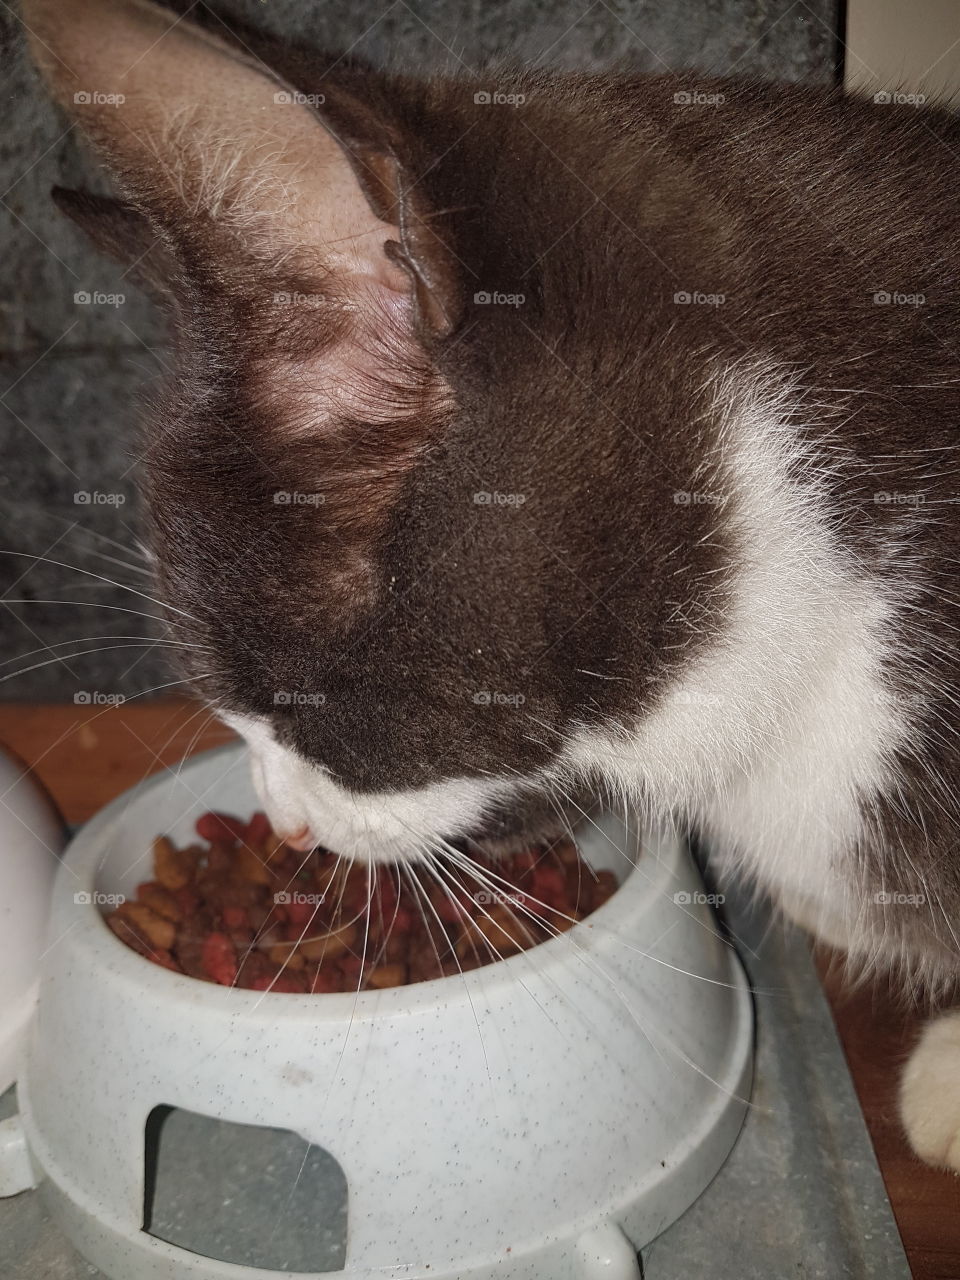 My cat is eating right now!

________